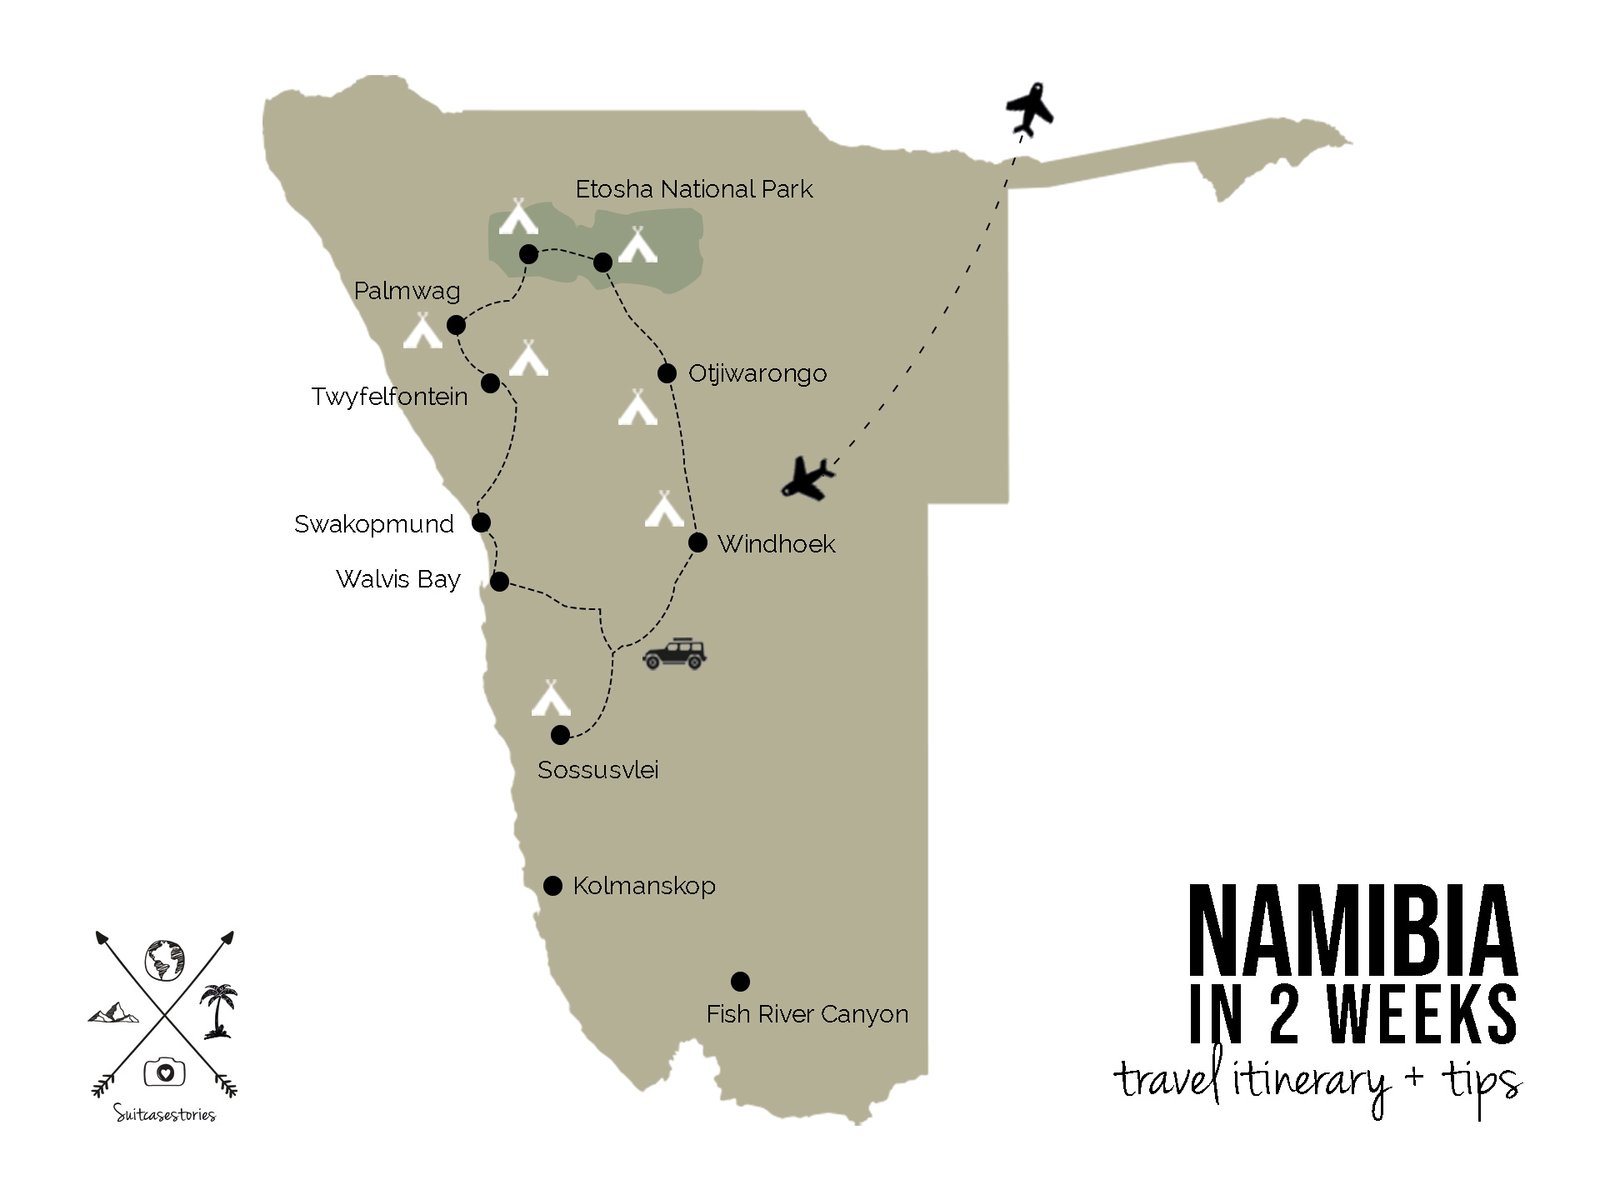 Namibia in 2 weeks travel itinerary + tips